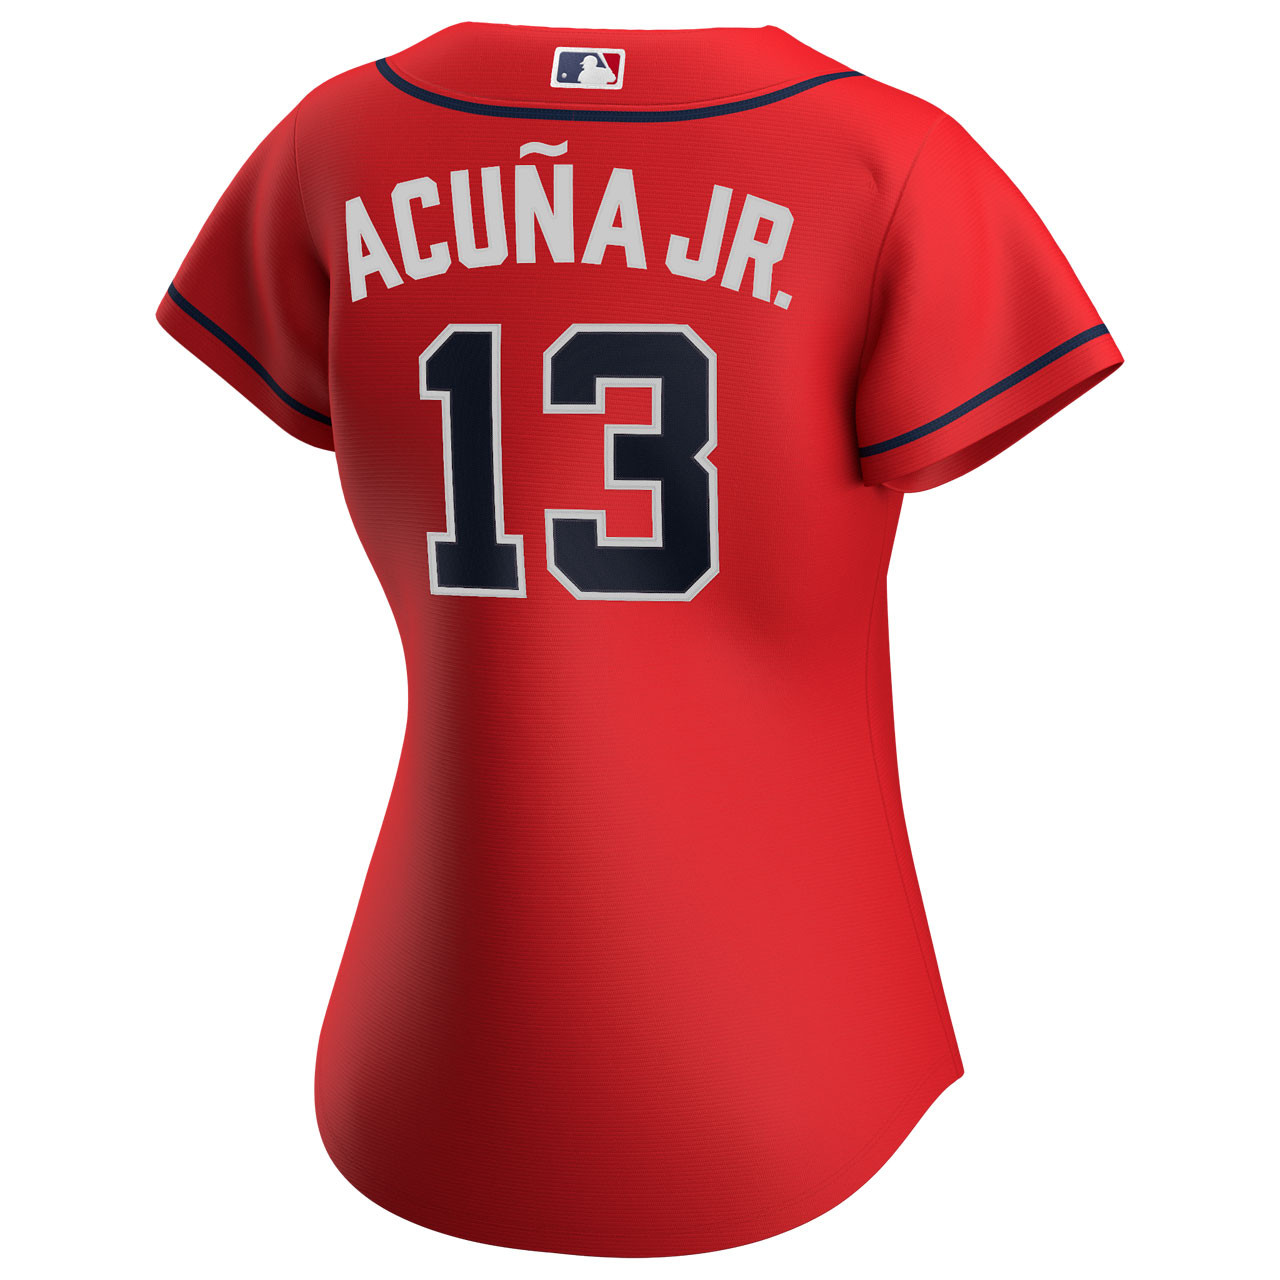 ronald acuna jr red jersey